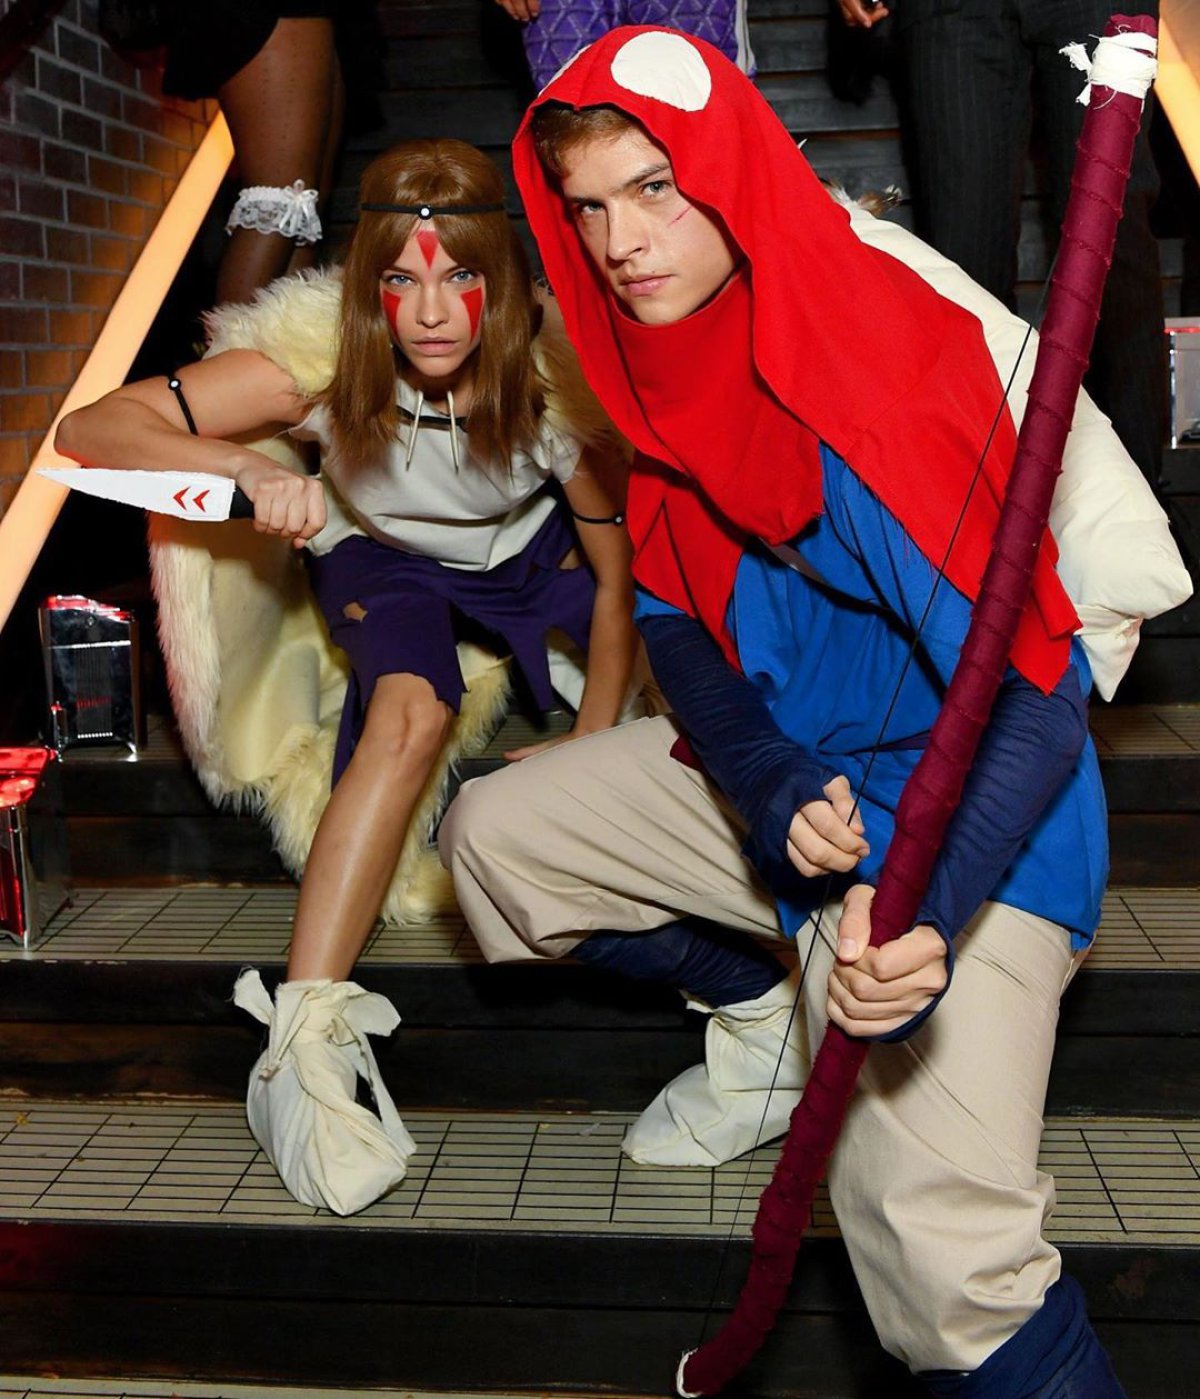 Barbara Palvin y Dylan Sprouse